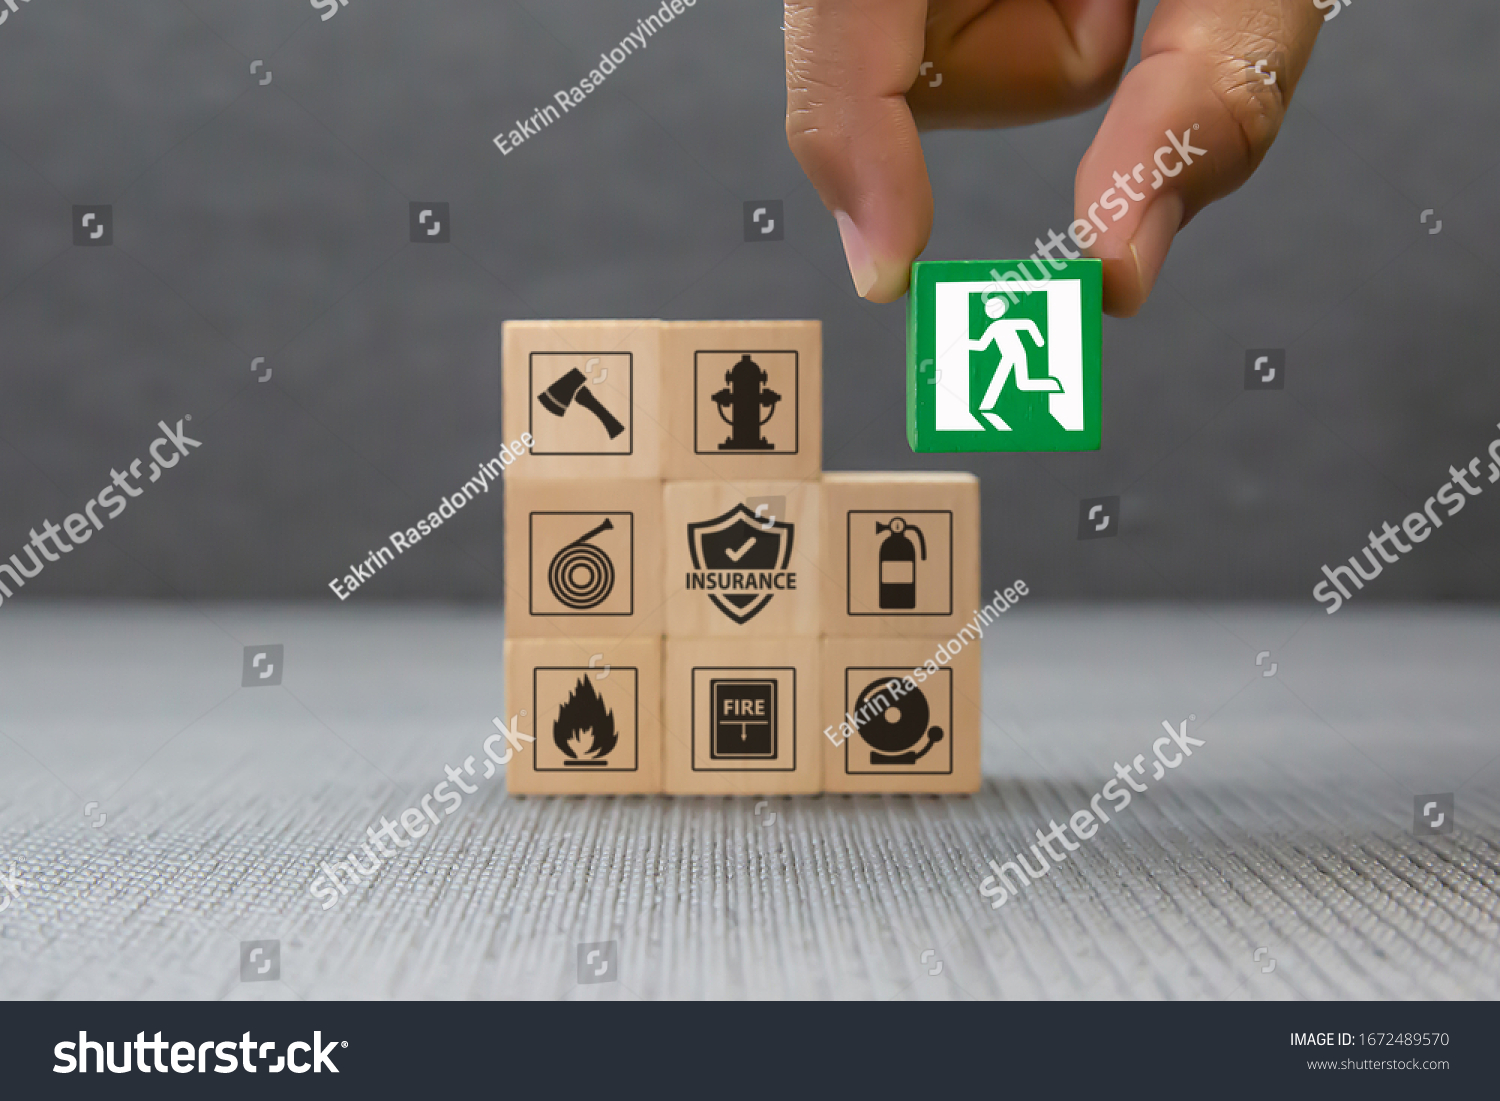 Close-up hand choose a wooden toy blocks with fire exit icon for fire safety protection concepts. #1672489570